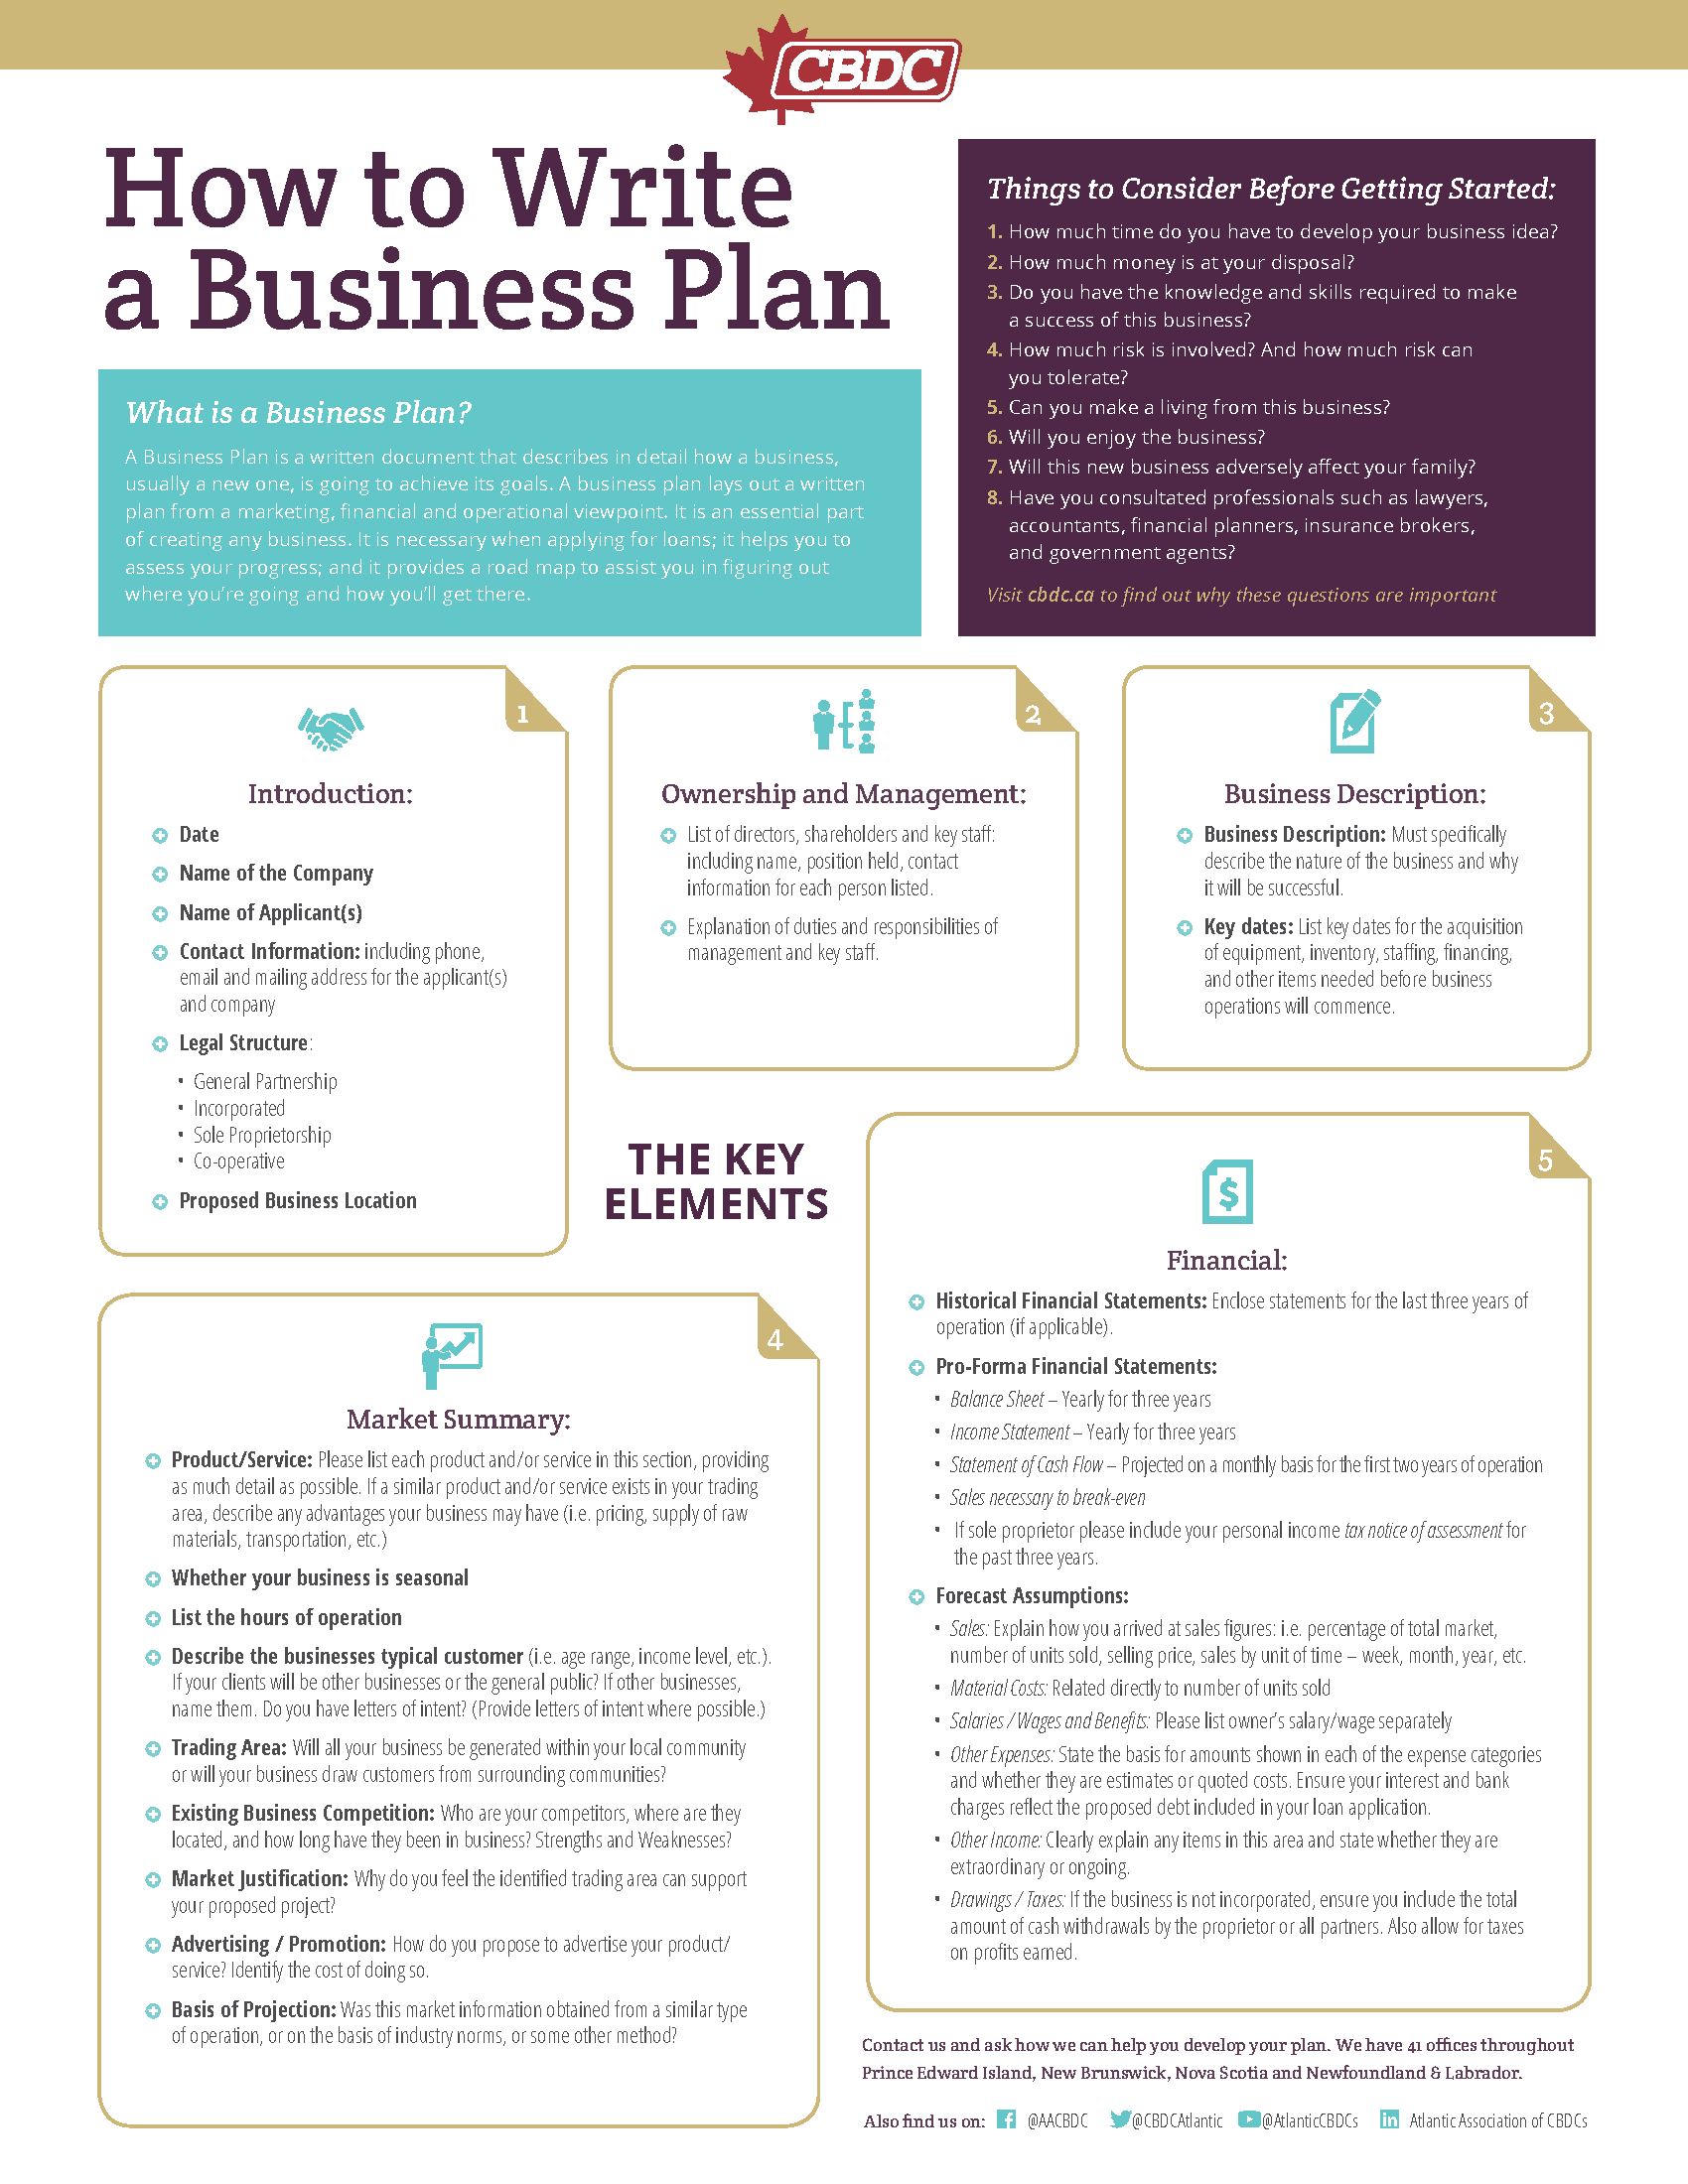 video on how to write a business plan